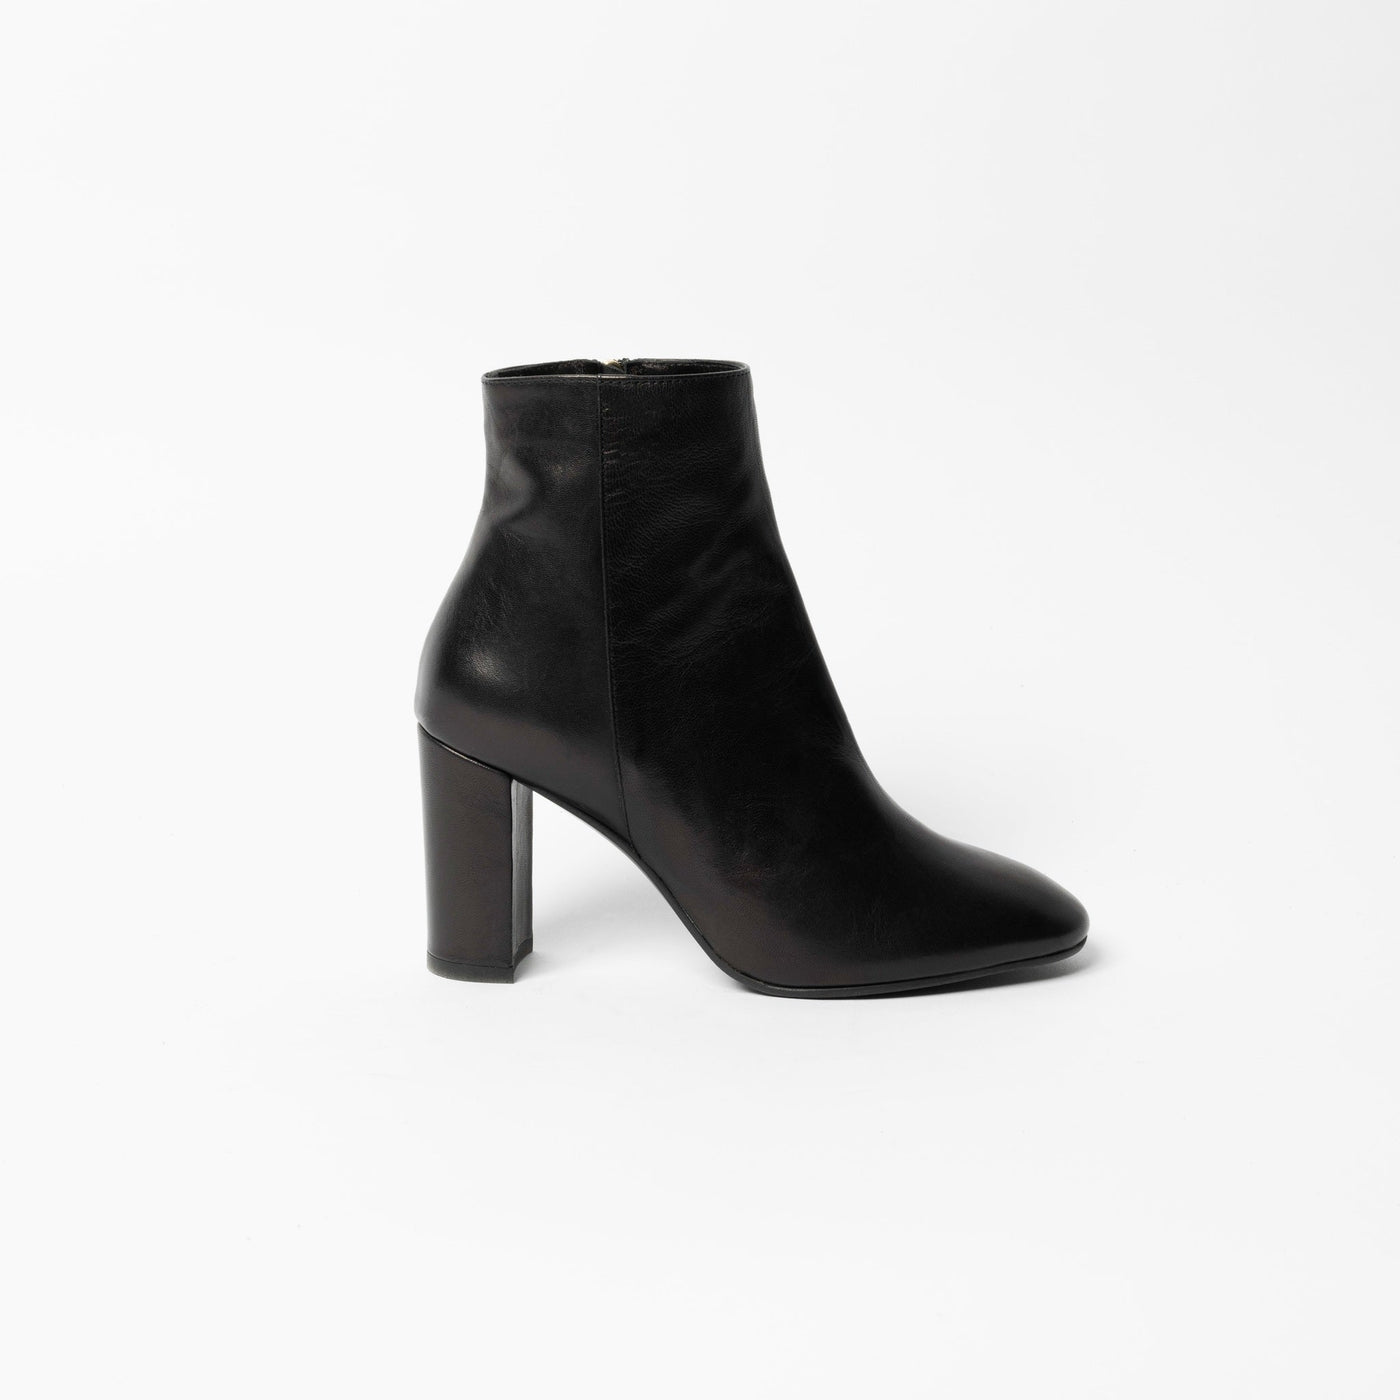 Black leather ankle boots with block heel.